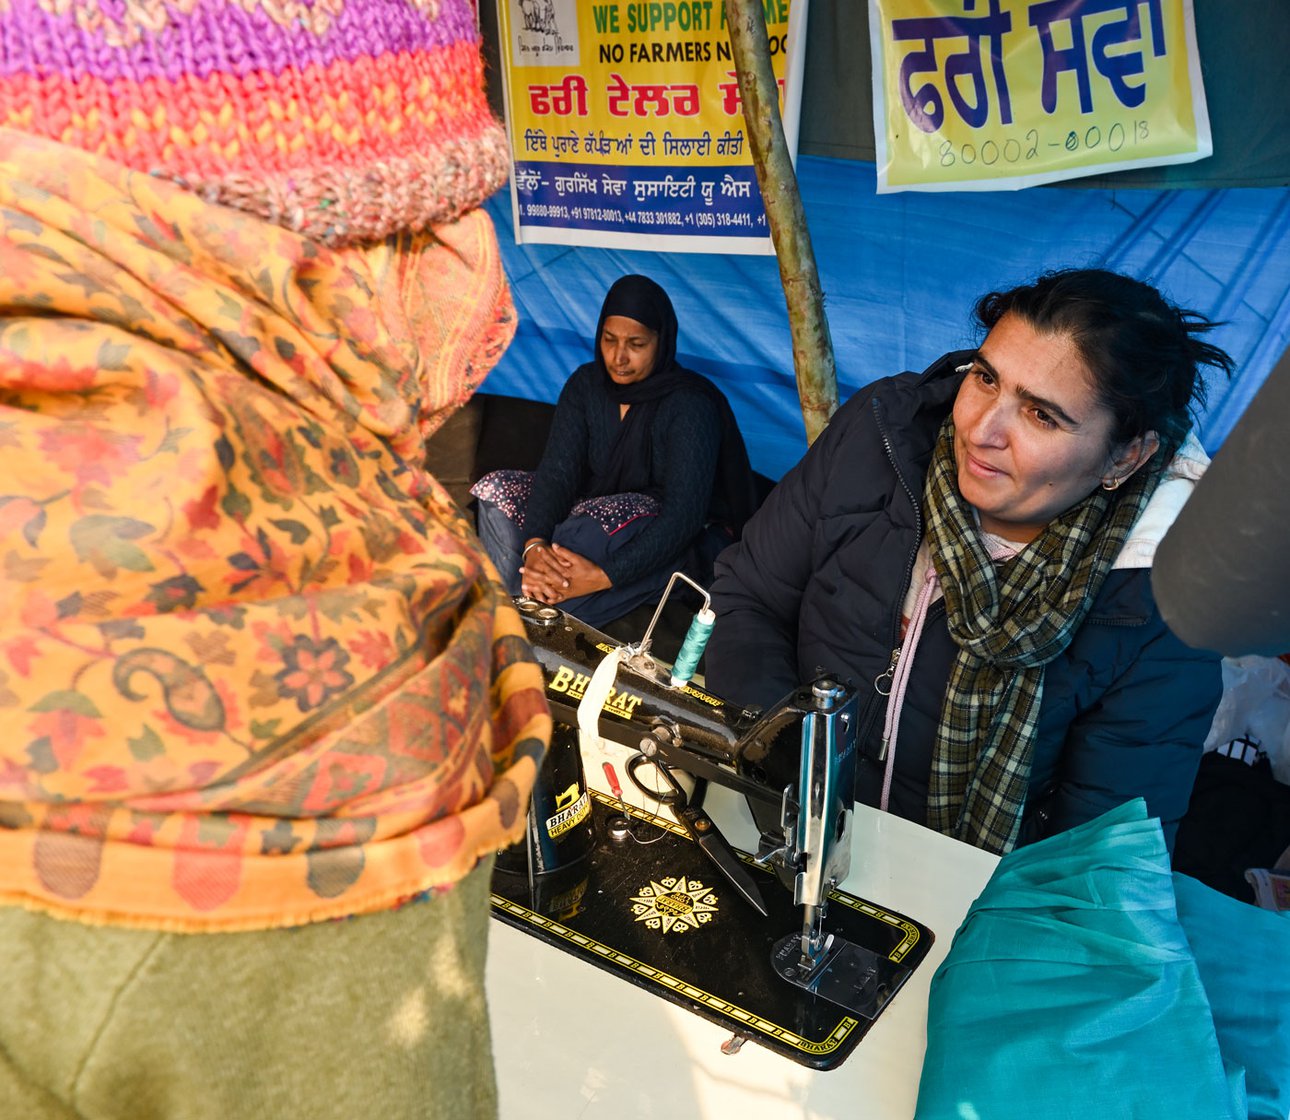 Kamaljit Kaur, a teacher from Ludhiana, and her colleagues have brought two sewing machines to Singhu, and fix for free missing shirt-buttons or tears in salwar-kameez outfits of the protesting farmers – as their form of solidarity